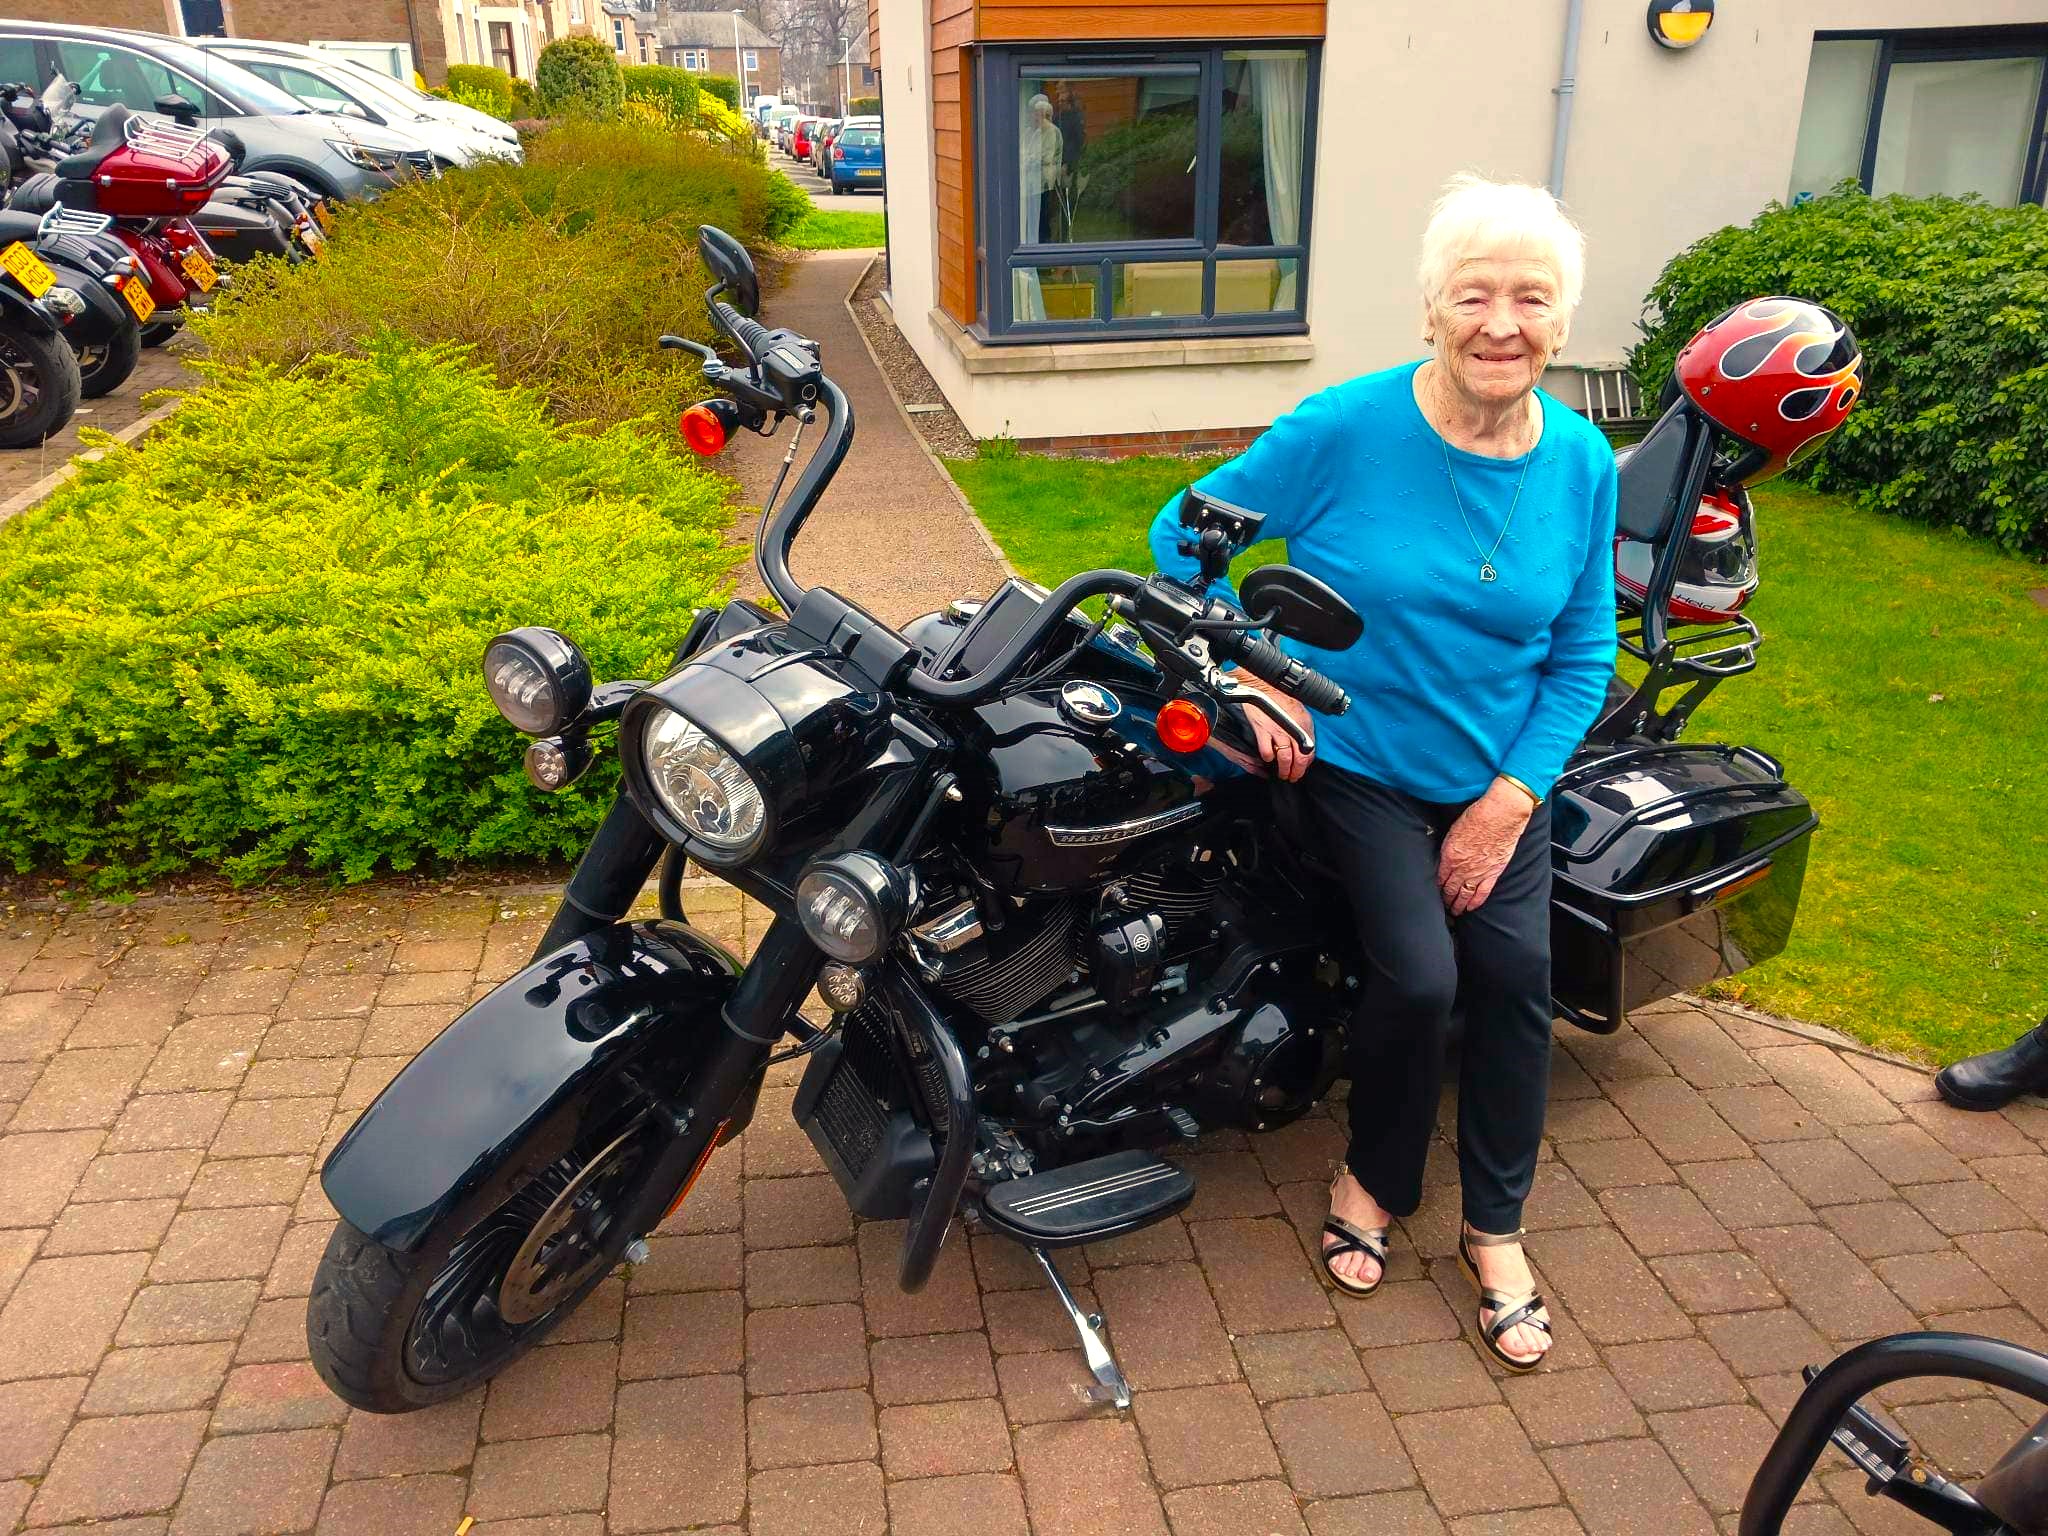 Residents at St Ronan's had an Easter Sunday to remember thanks to some generous local bikers.